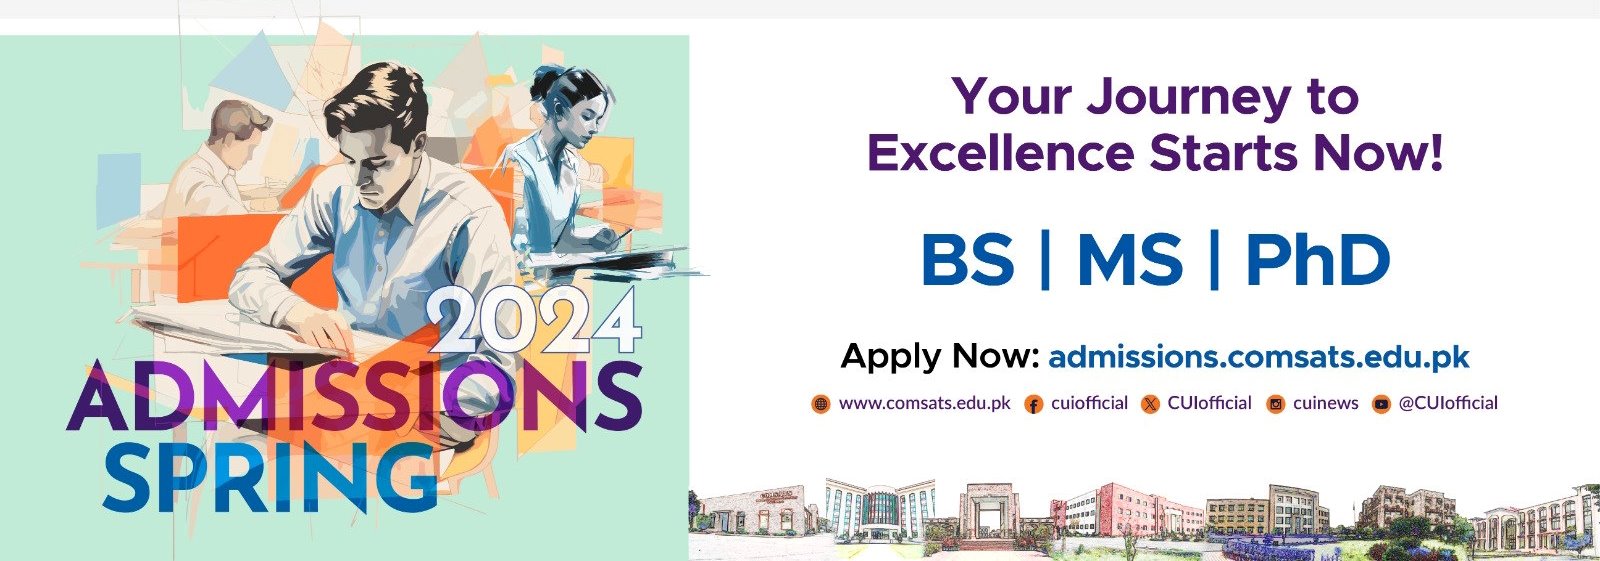 University Of Lahore - Admissions Open - Spring 2022 Last date to apply is  07th January, 2022. No Form/Voucher number is required for online  application. Link: admissions.uol.edu.pk